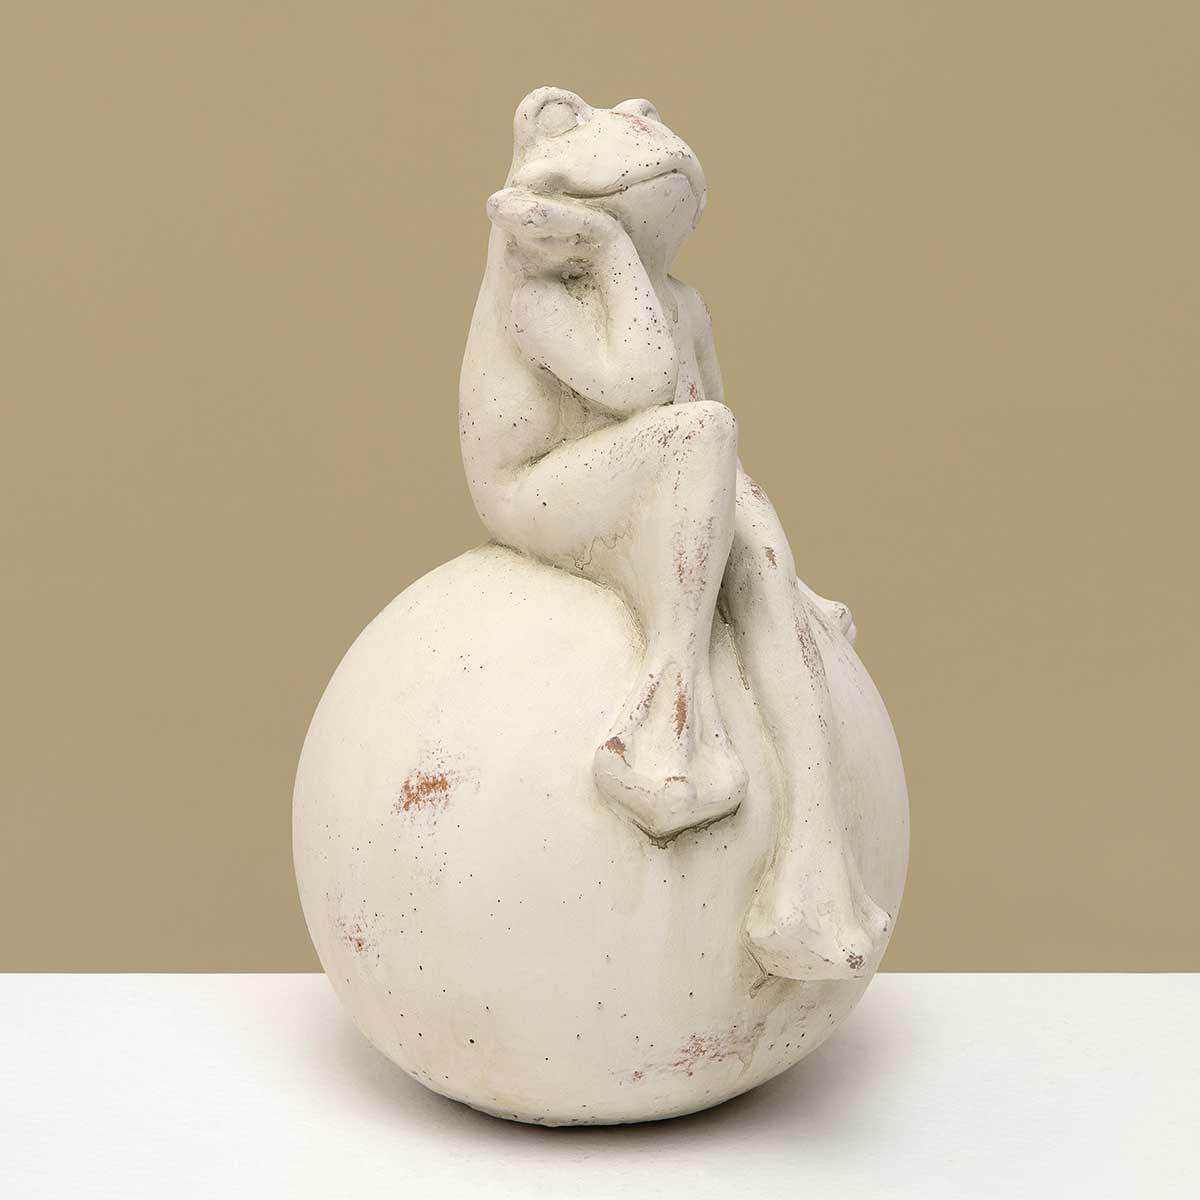 FROG ON BALL THINKING 5.5IN X 5IN X 7.5IN WHITE WASH CONCRETE